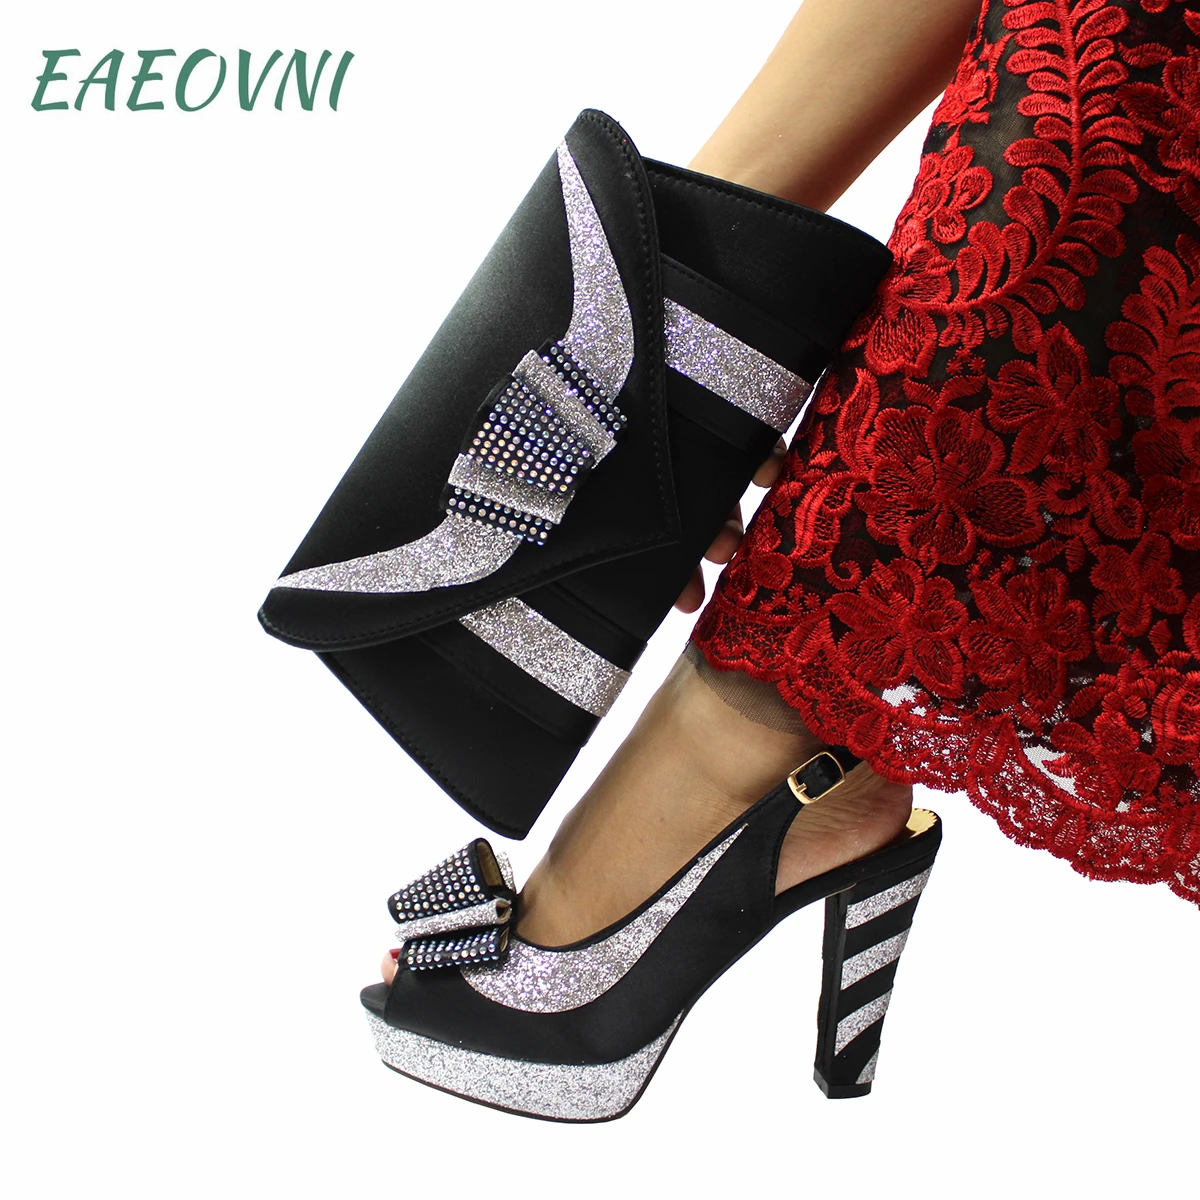 

Black Color Latest Elegant Style Peep Toe Decorated With Butterfly Design Banquet Women's Shoes And Bag Set for Wedding Party